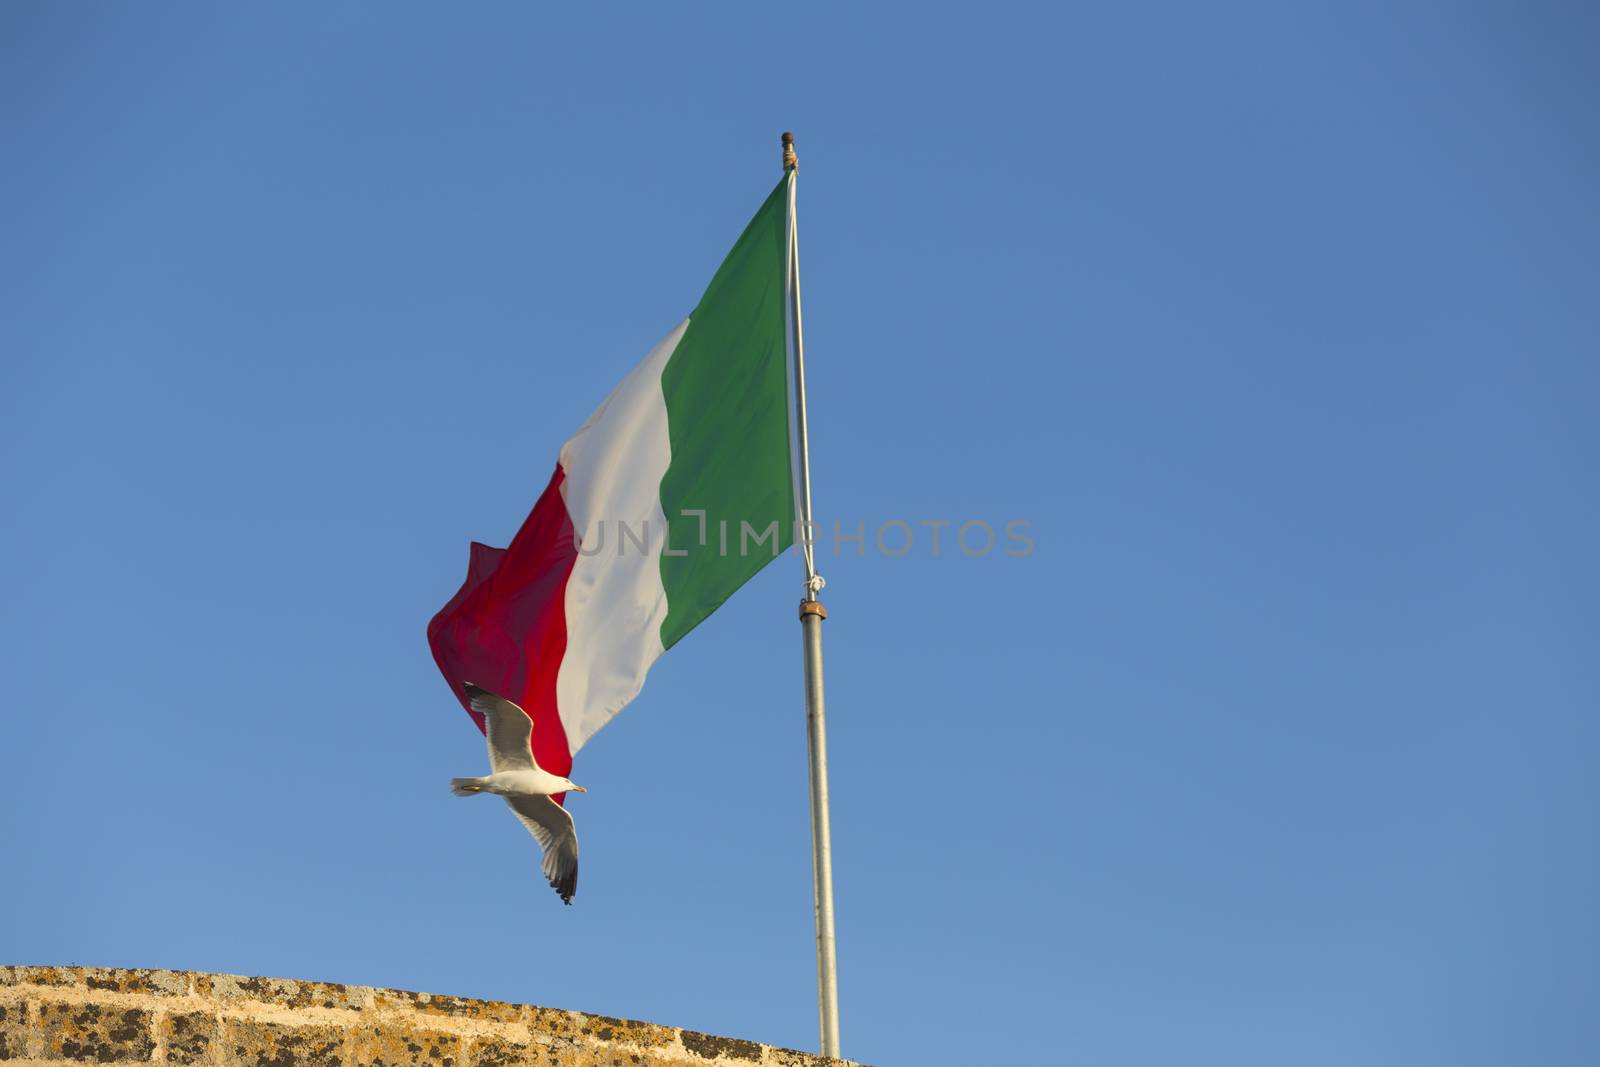 Seagulls (Larinae Rafinesque) flying near Italian flag blowing in the wind: red, white and green in Gallipoli (Lecce) in the South of Italy